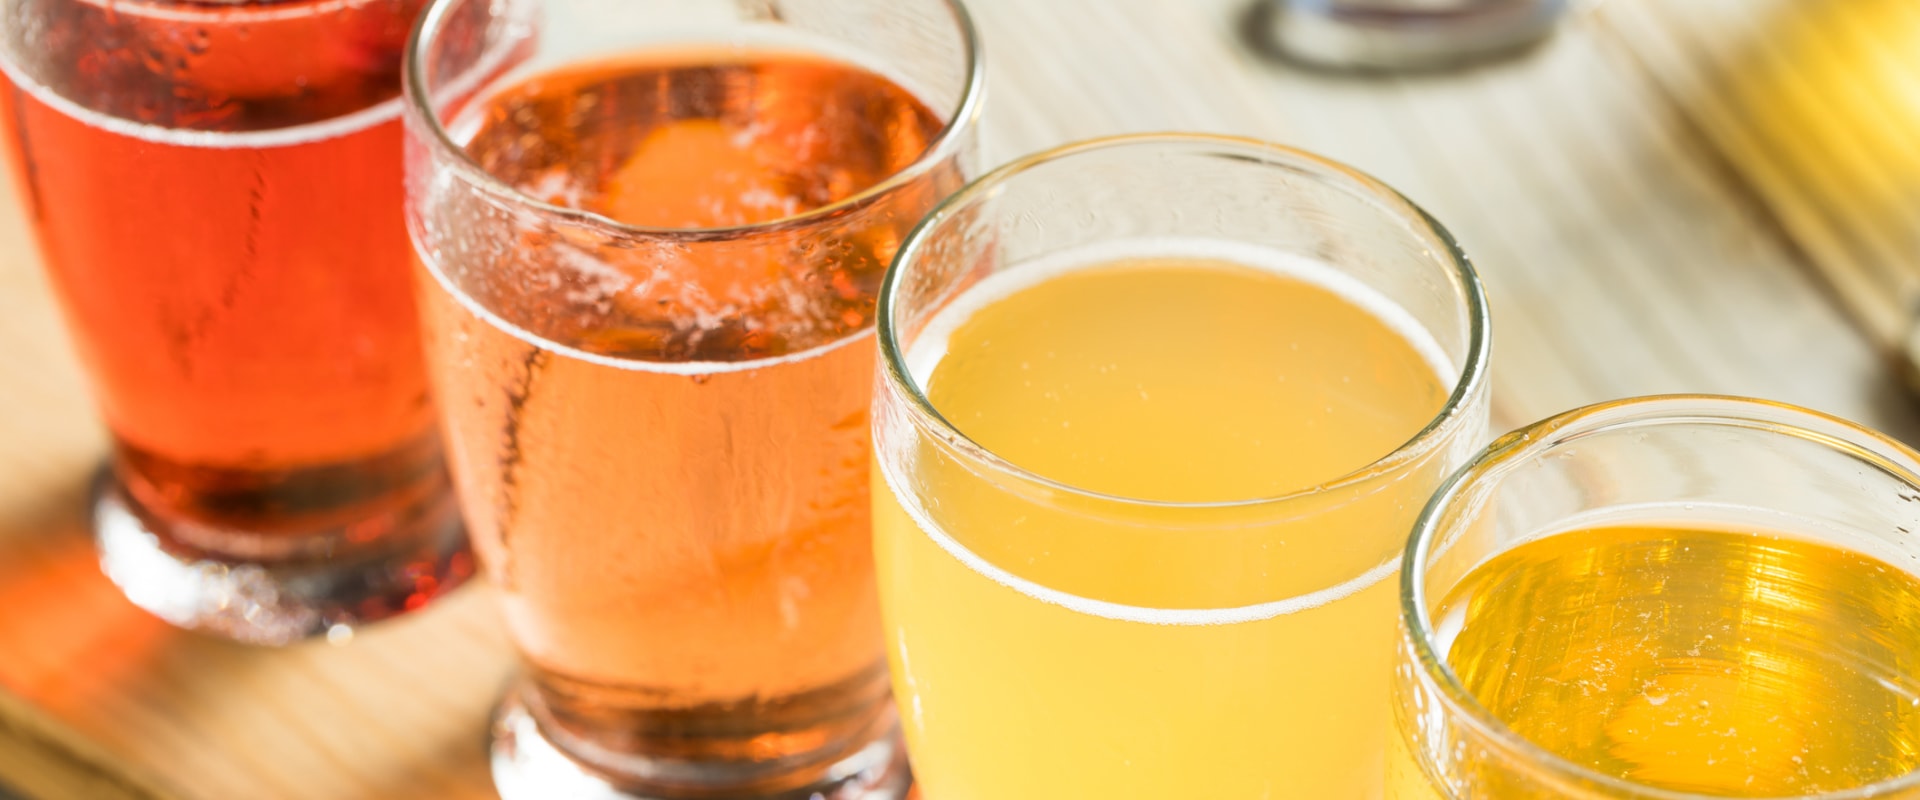 Is cider and beer the same thing?